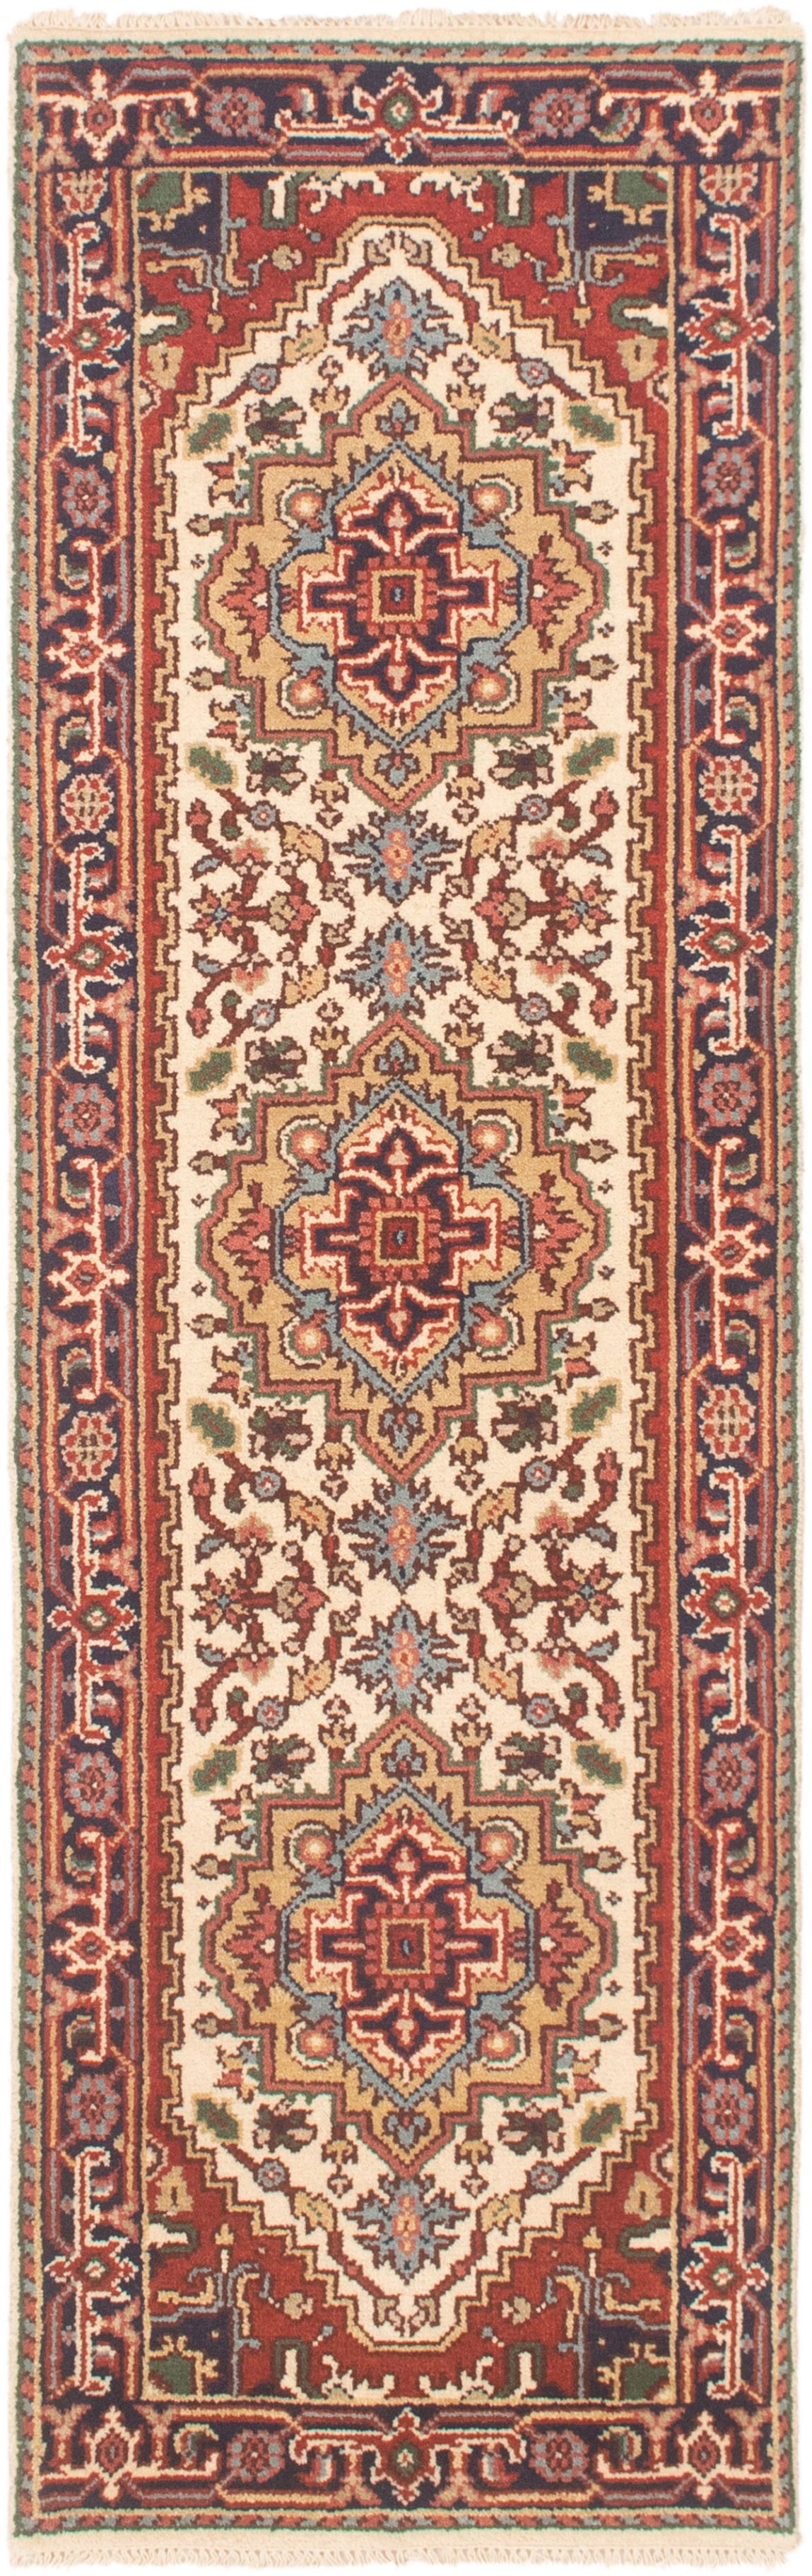 Hand-knotted Serapi Heritage Cream Wool Rug 2'8" x 8'3" Size: 2'8" x 8'3"  